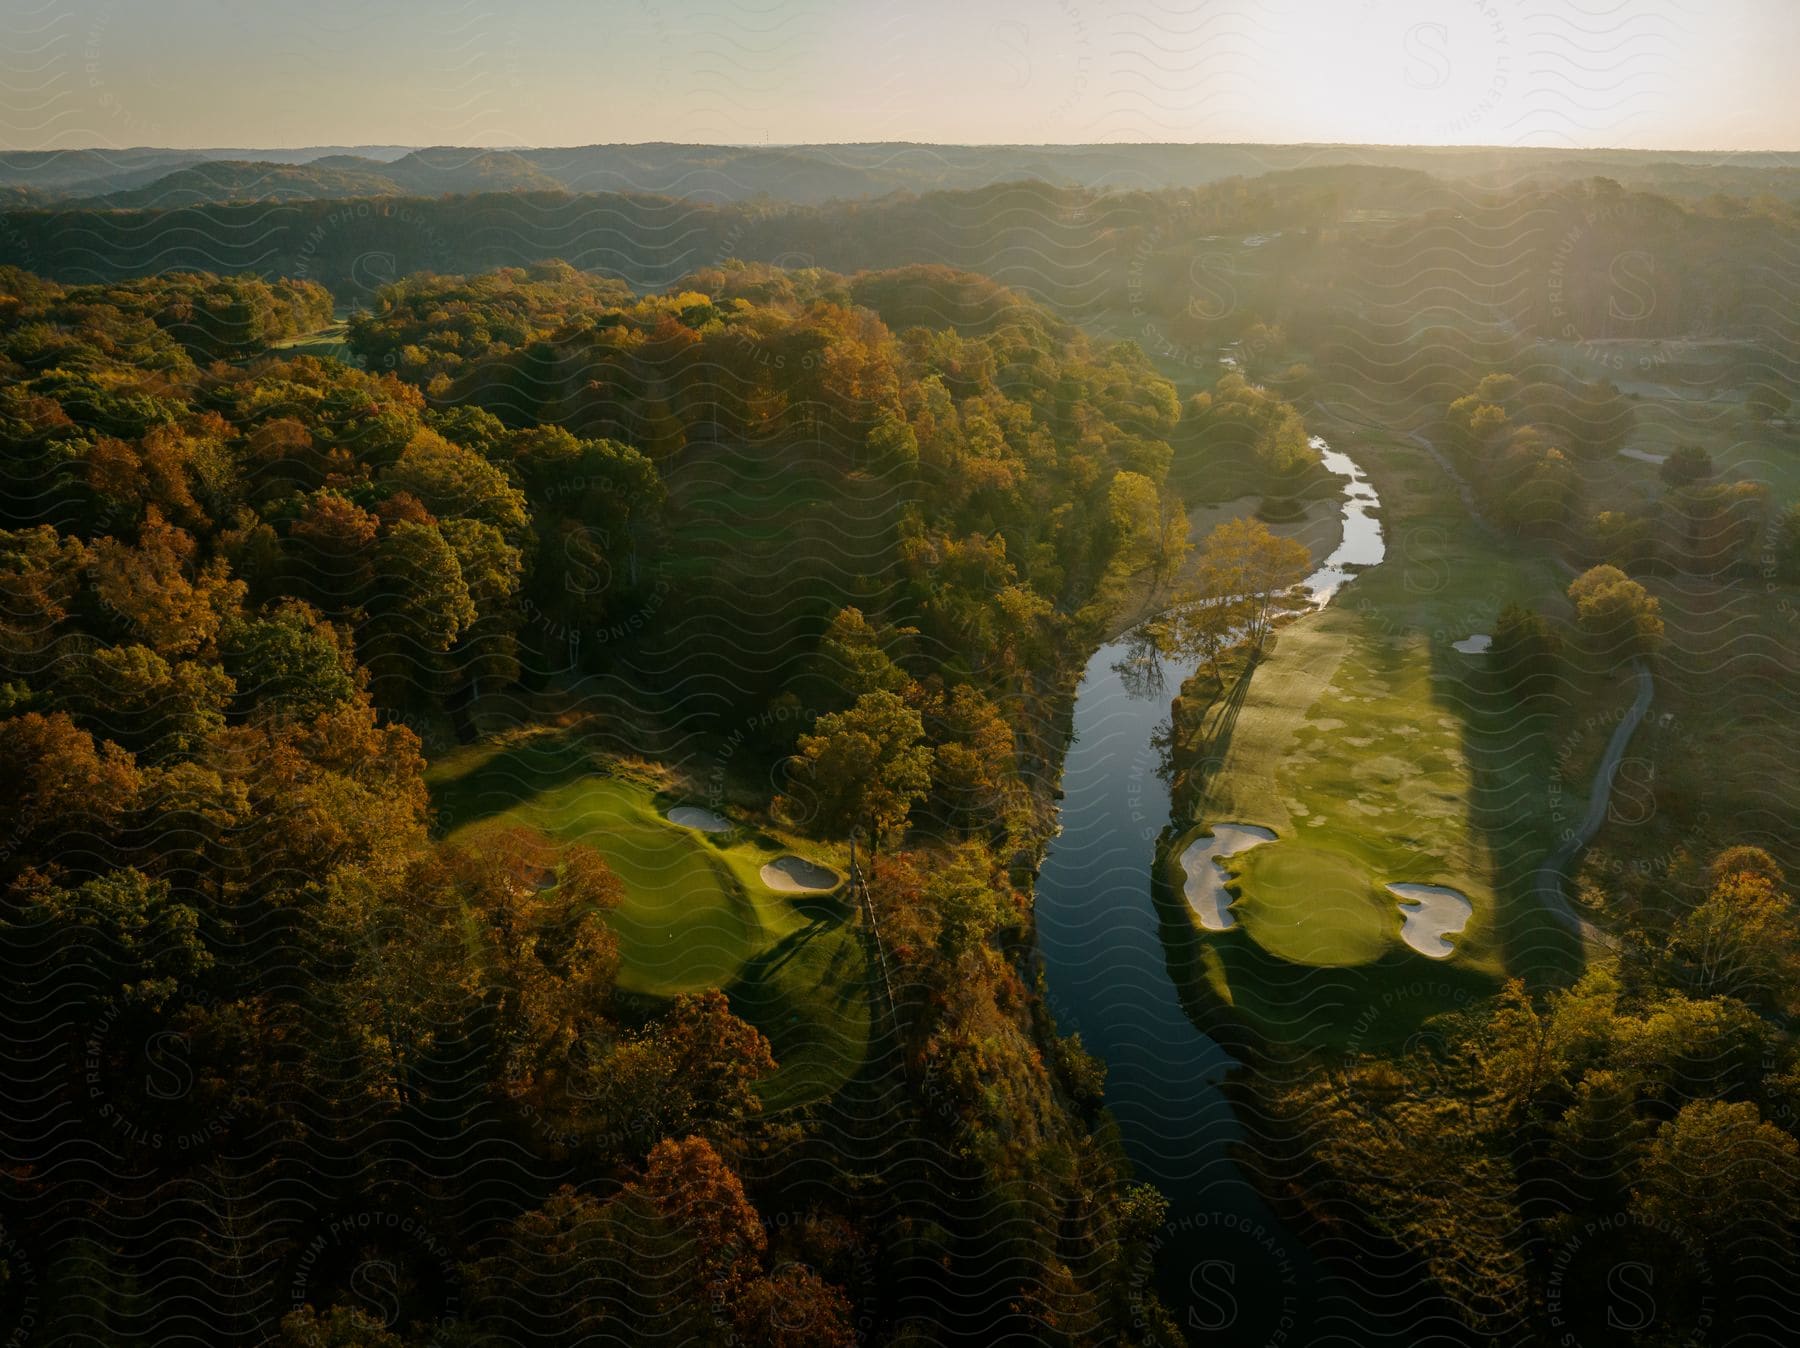 A river runs between golf courses surrounded by a forest of trees in fall colors